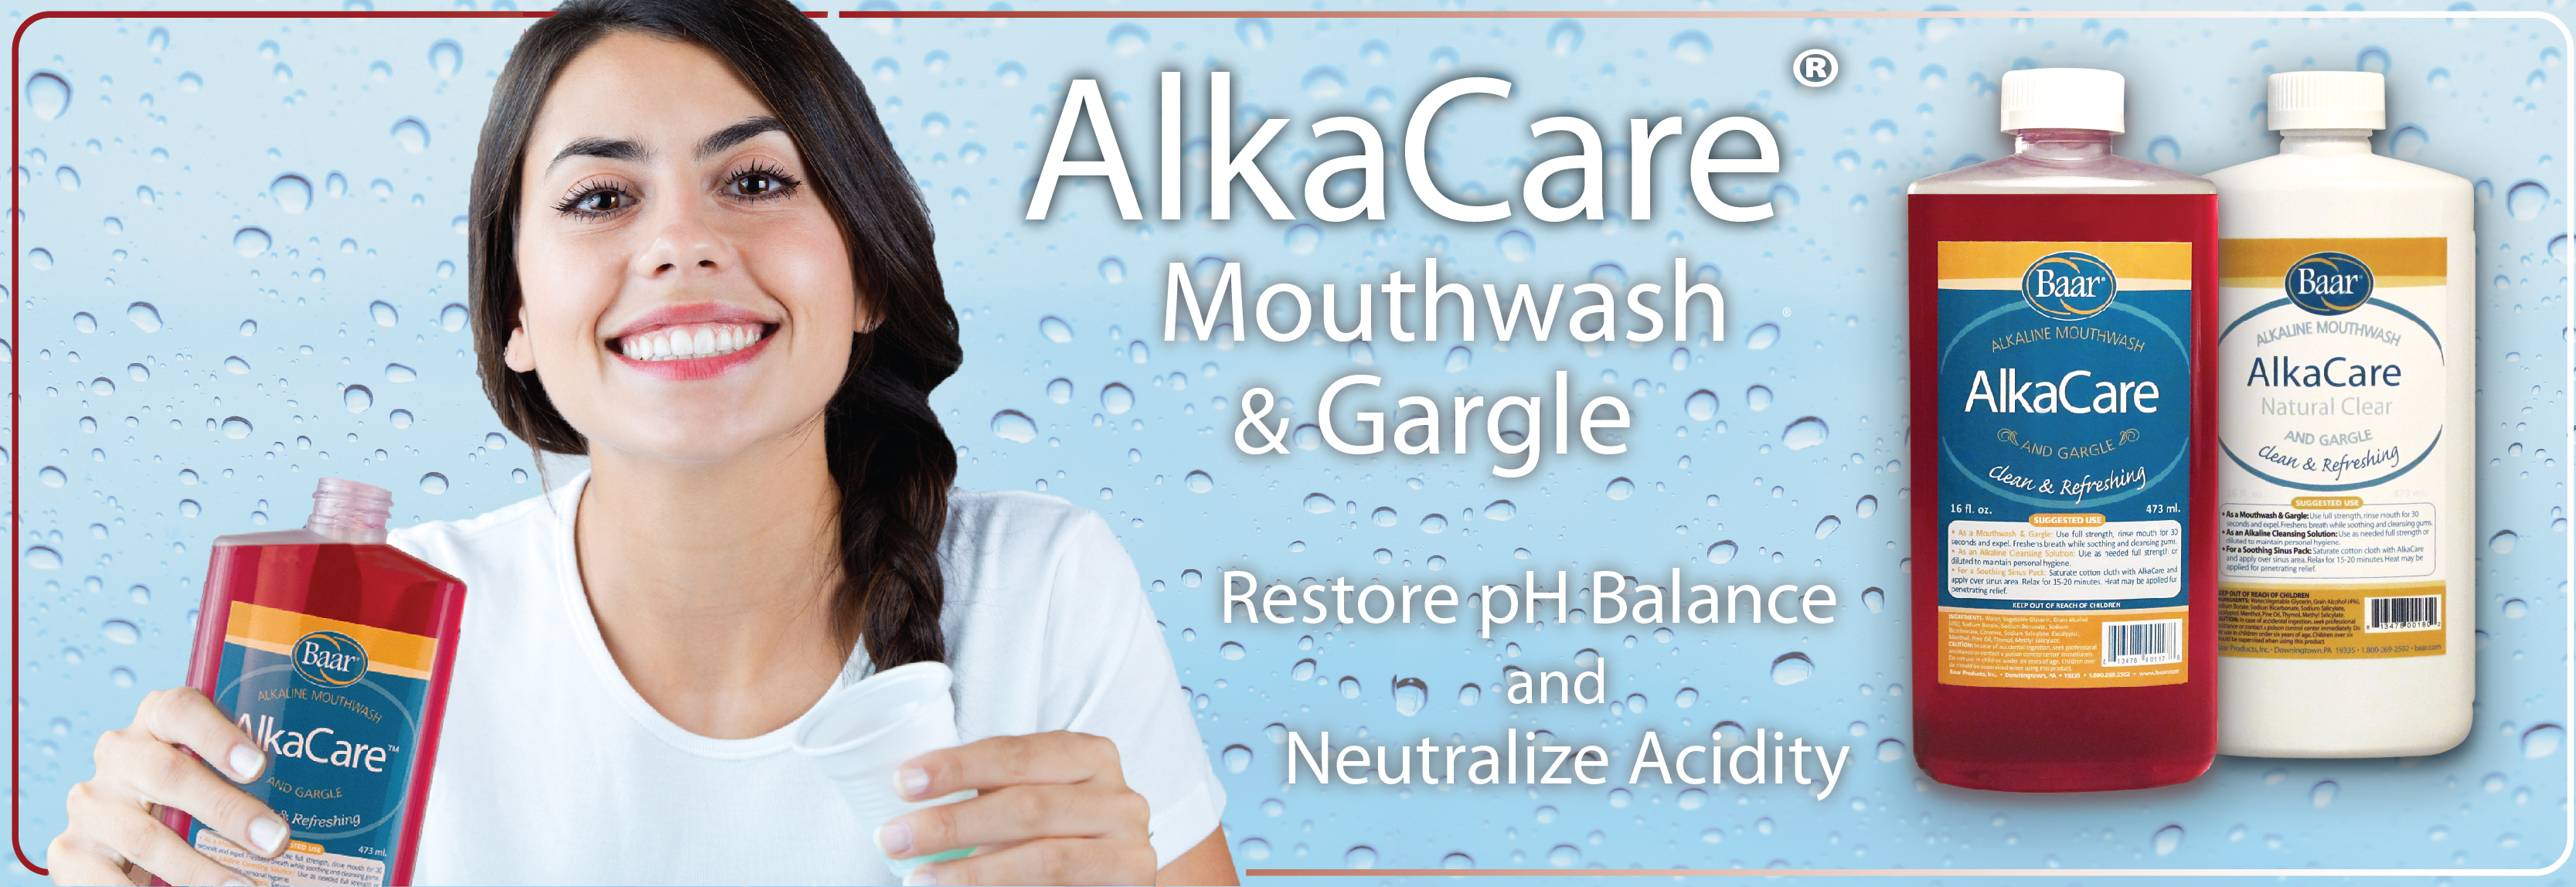 AlkaCare combines an invigorating taste with an alkalizing pH to help protect teeth and gums